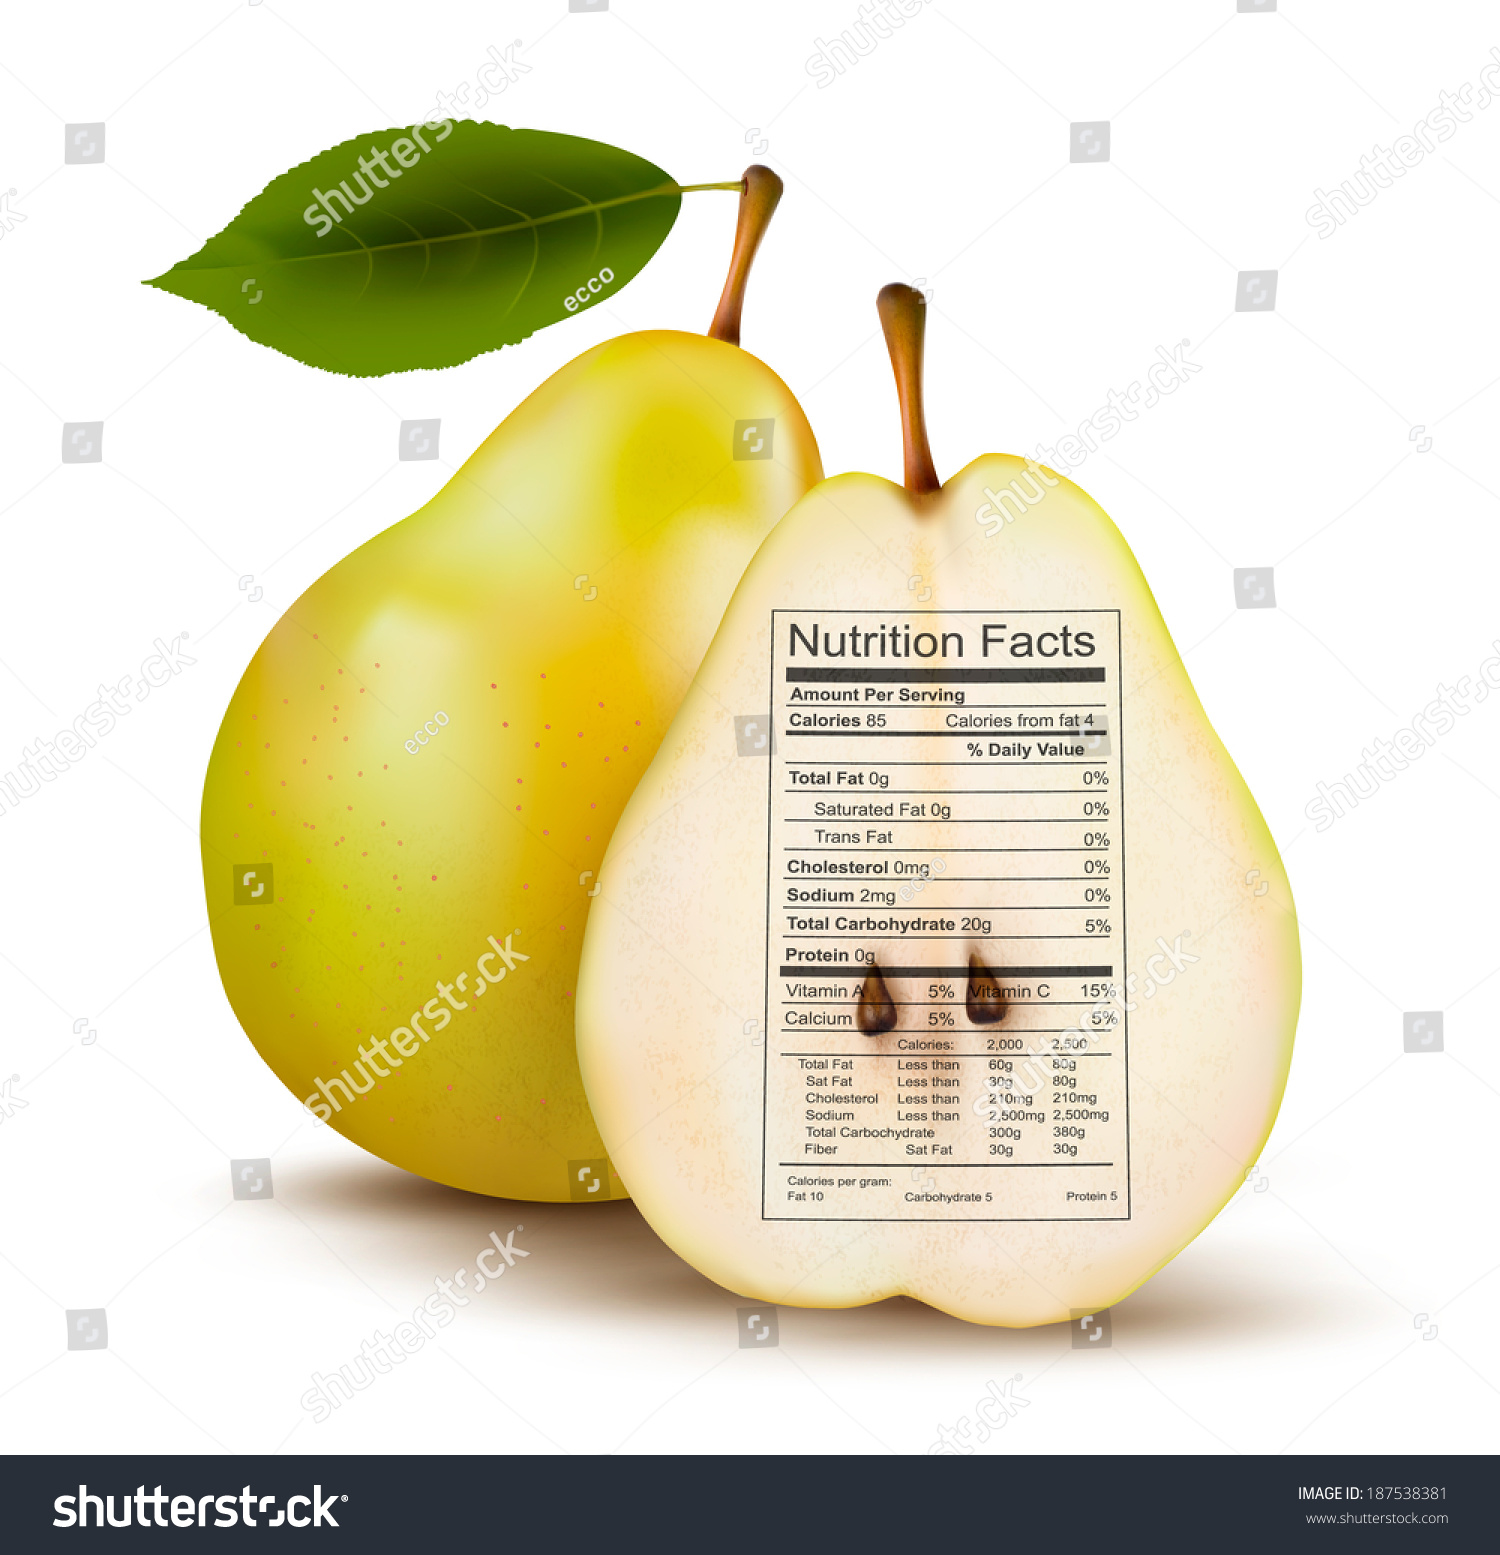 Pear Nutrition Facts Label Concept Healthy Stock Vector Royalty Free 187538381 Shutterstock 